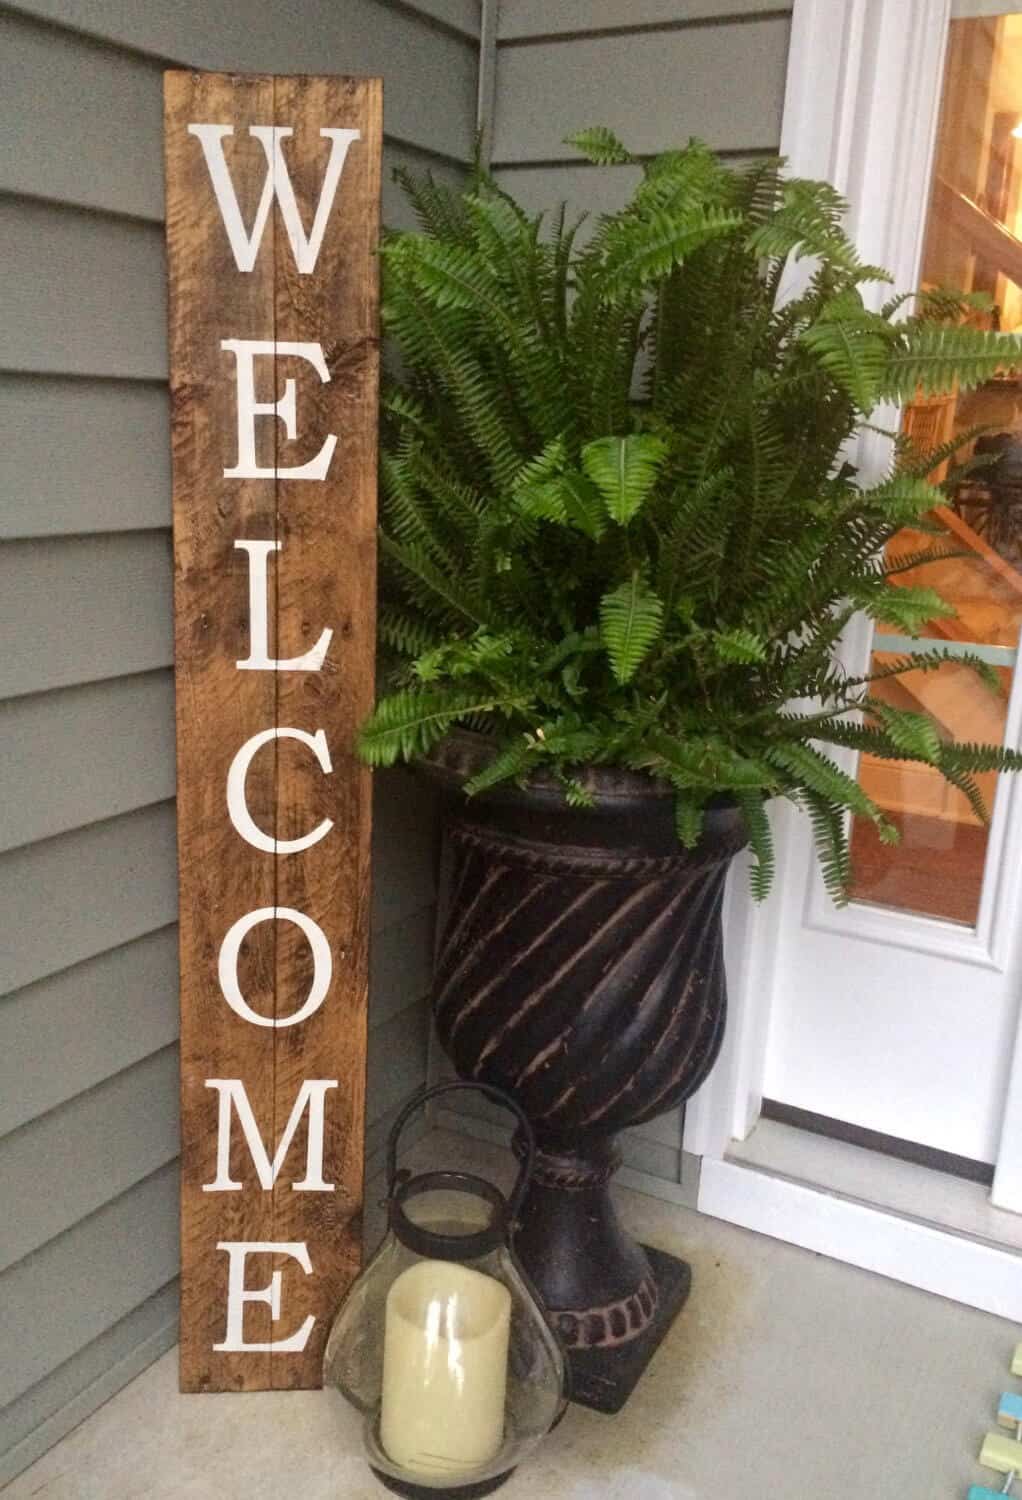 A simple welcome sign on a piece of wood can make a huge difference in the appearance of your porch